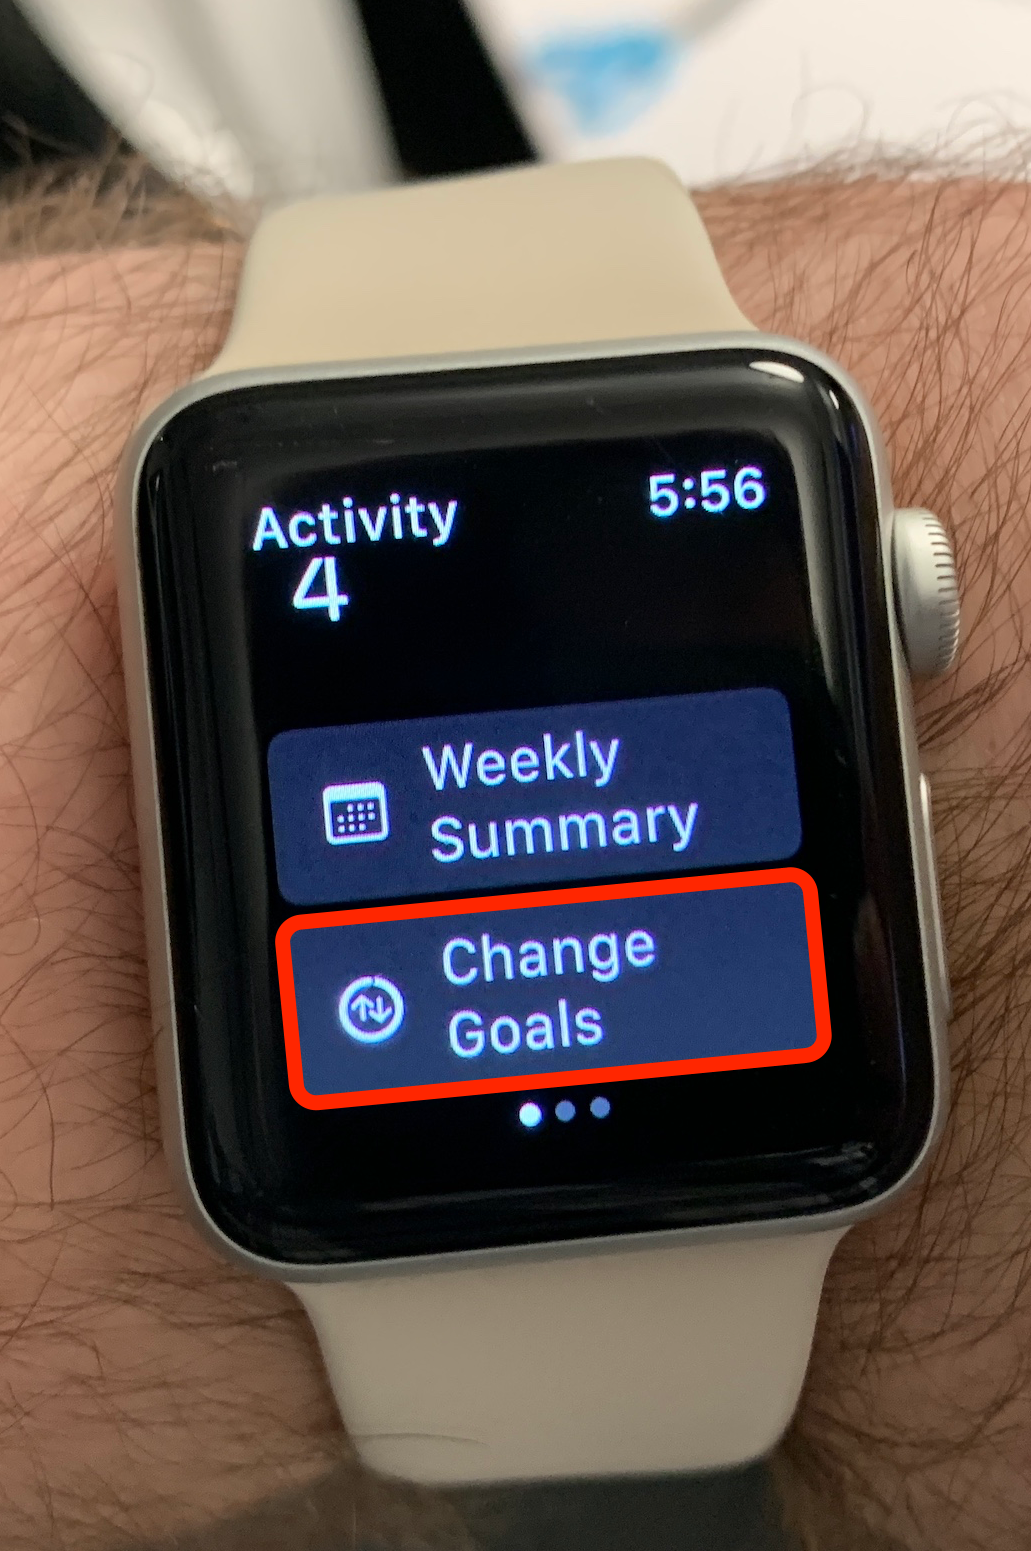 The Activity app on an Apple Watch. The Change Goals option is highlighted.